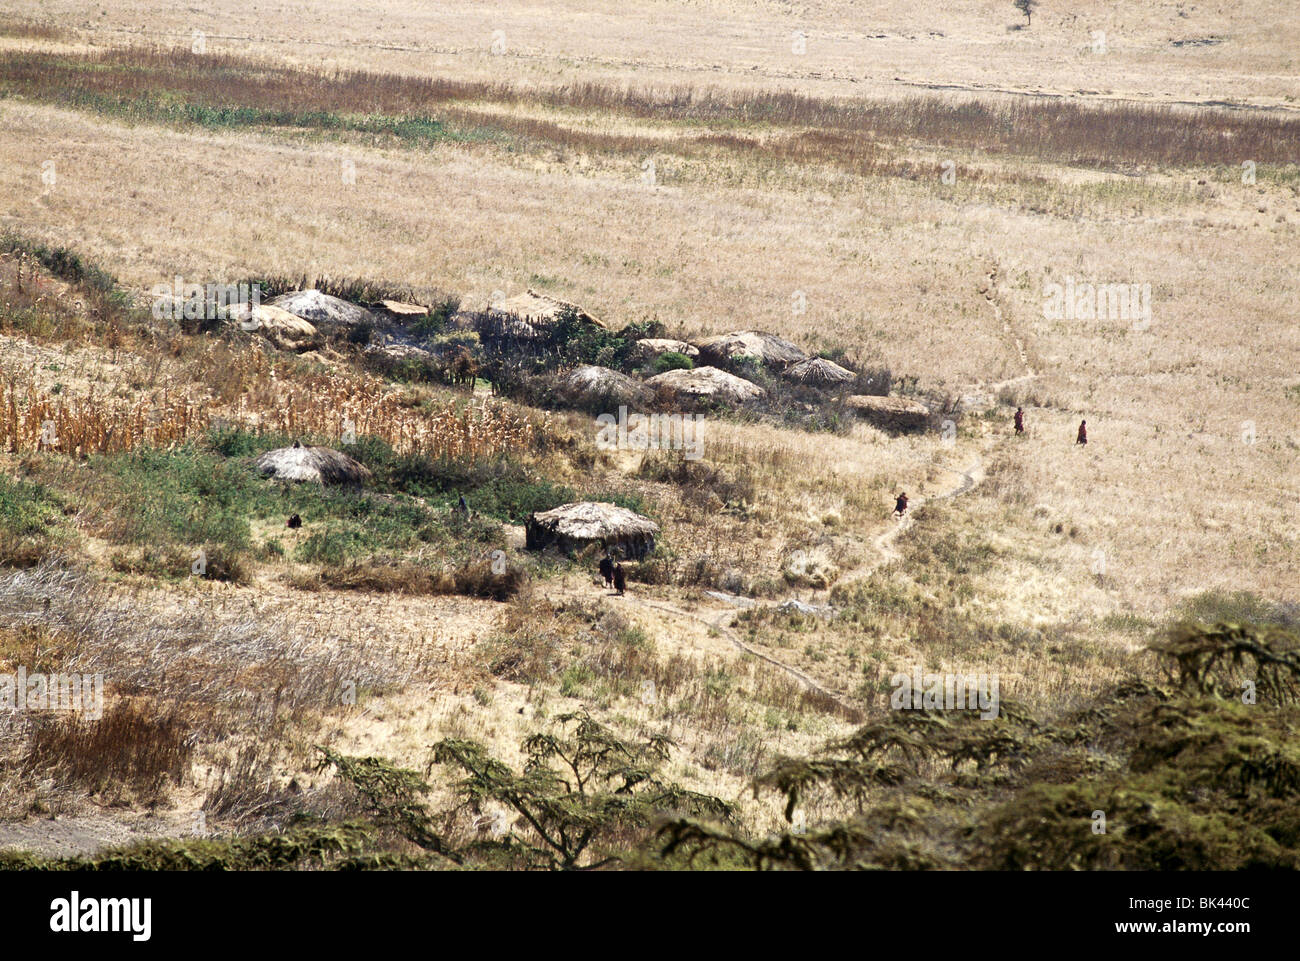 Village in the Ngorongoro Crater, Tanzania, East Africa Stock Photo